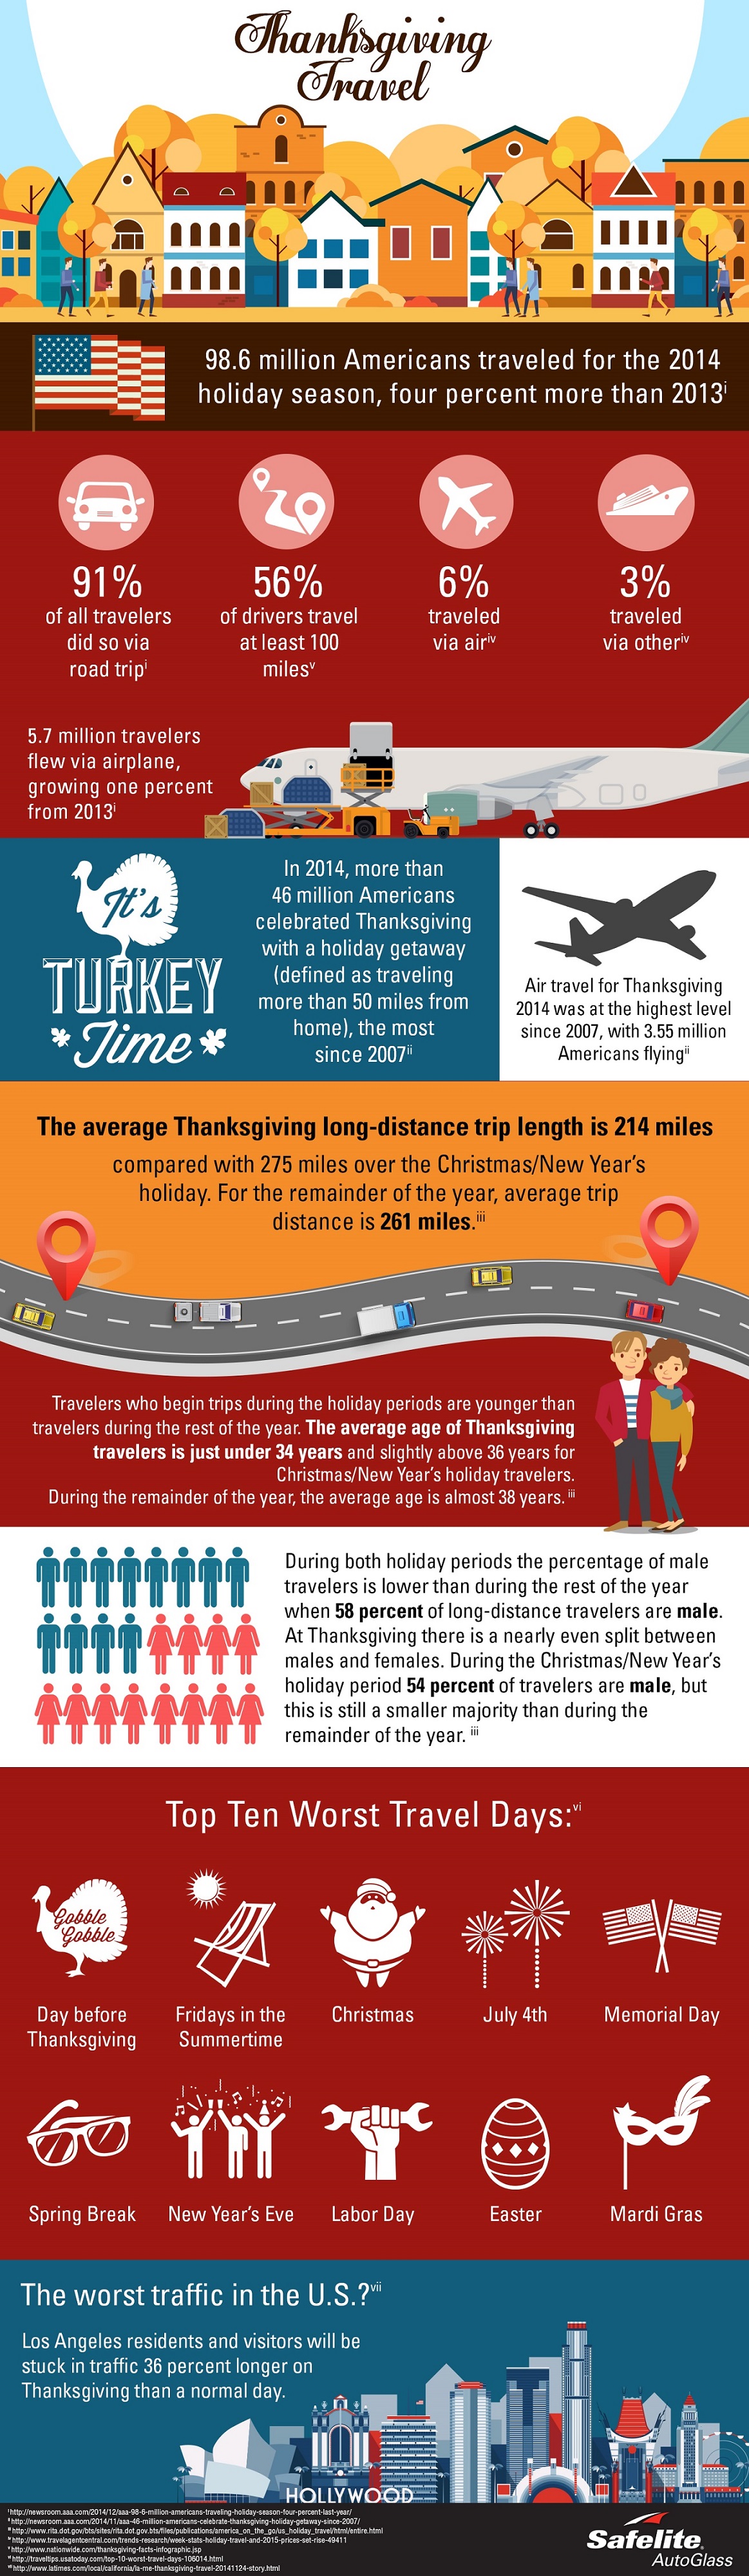 Safelite shares holiday road trip insights in this infographic.